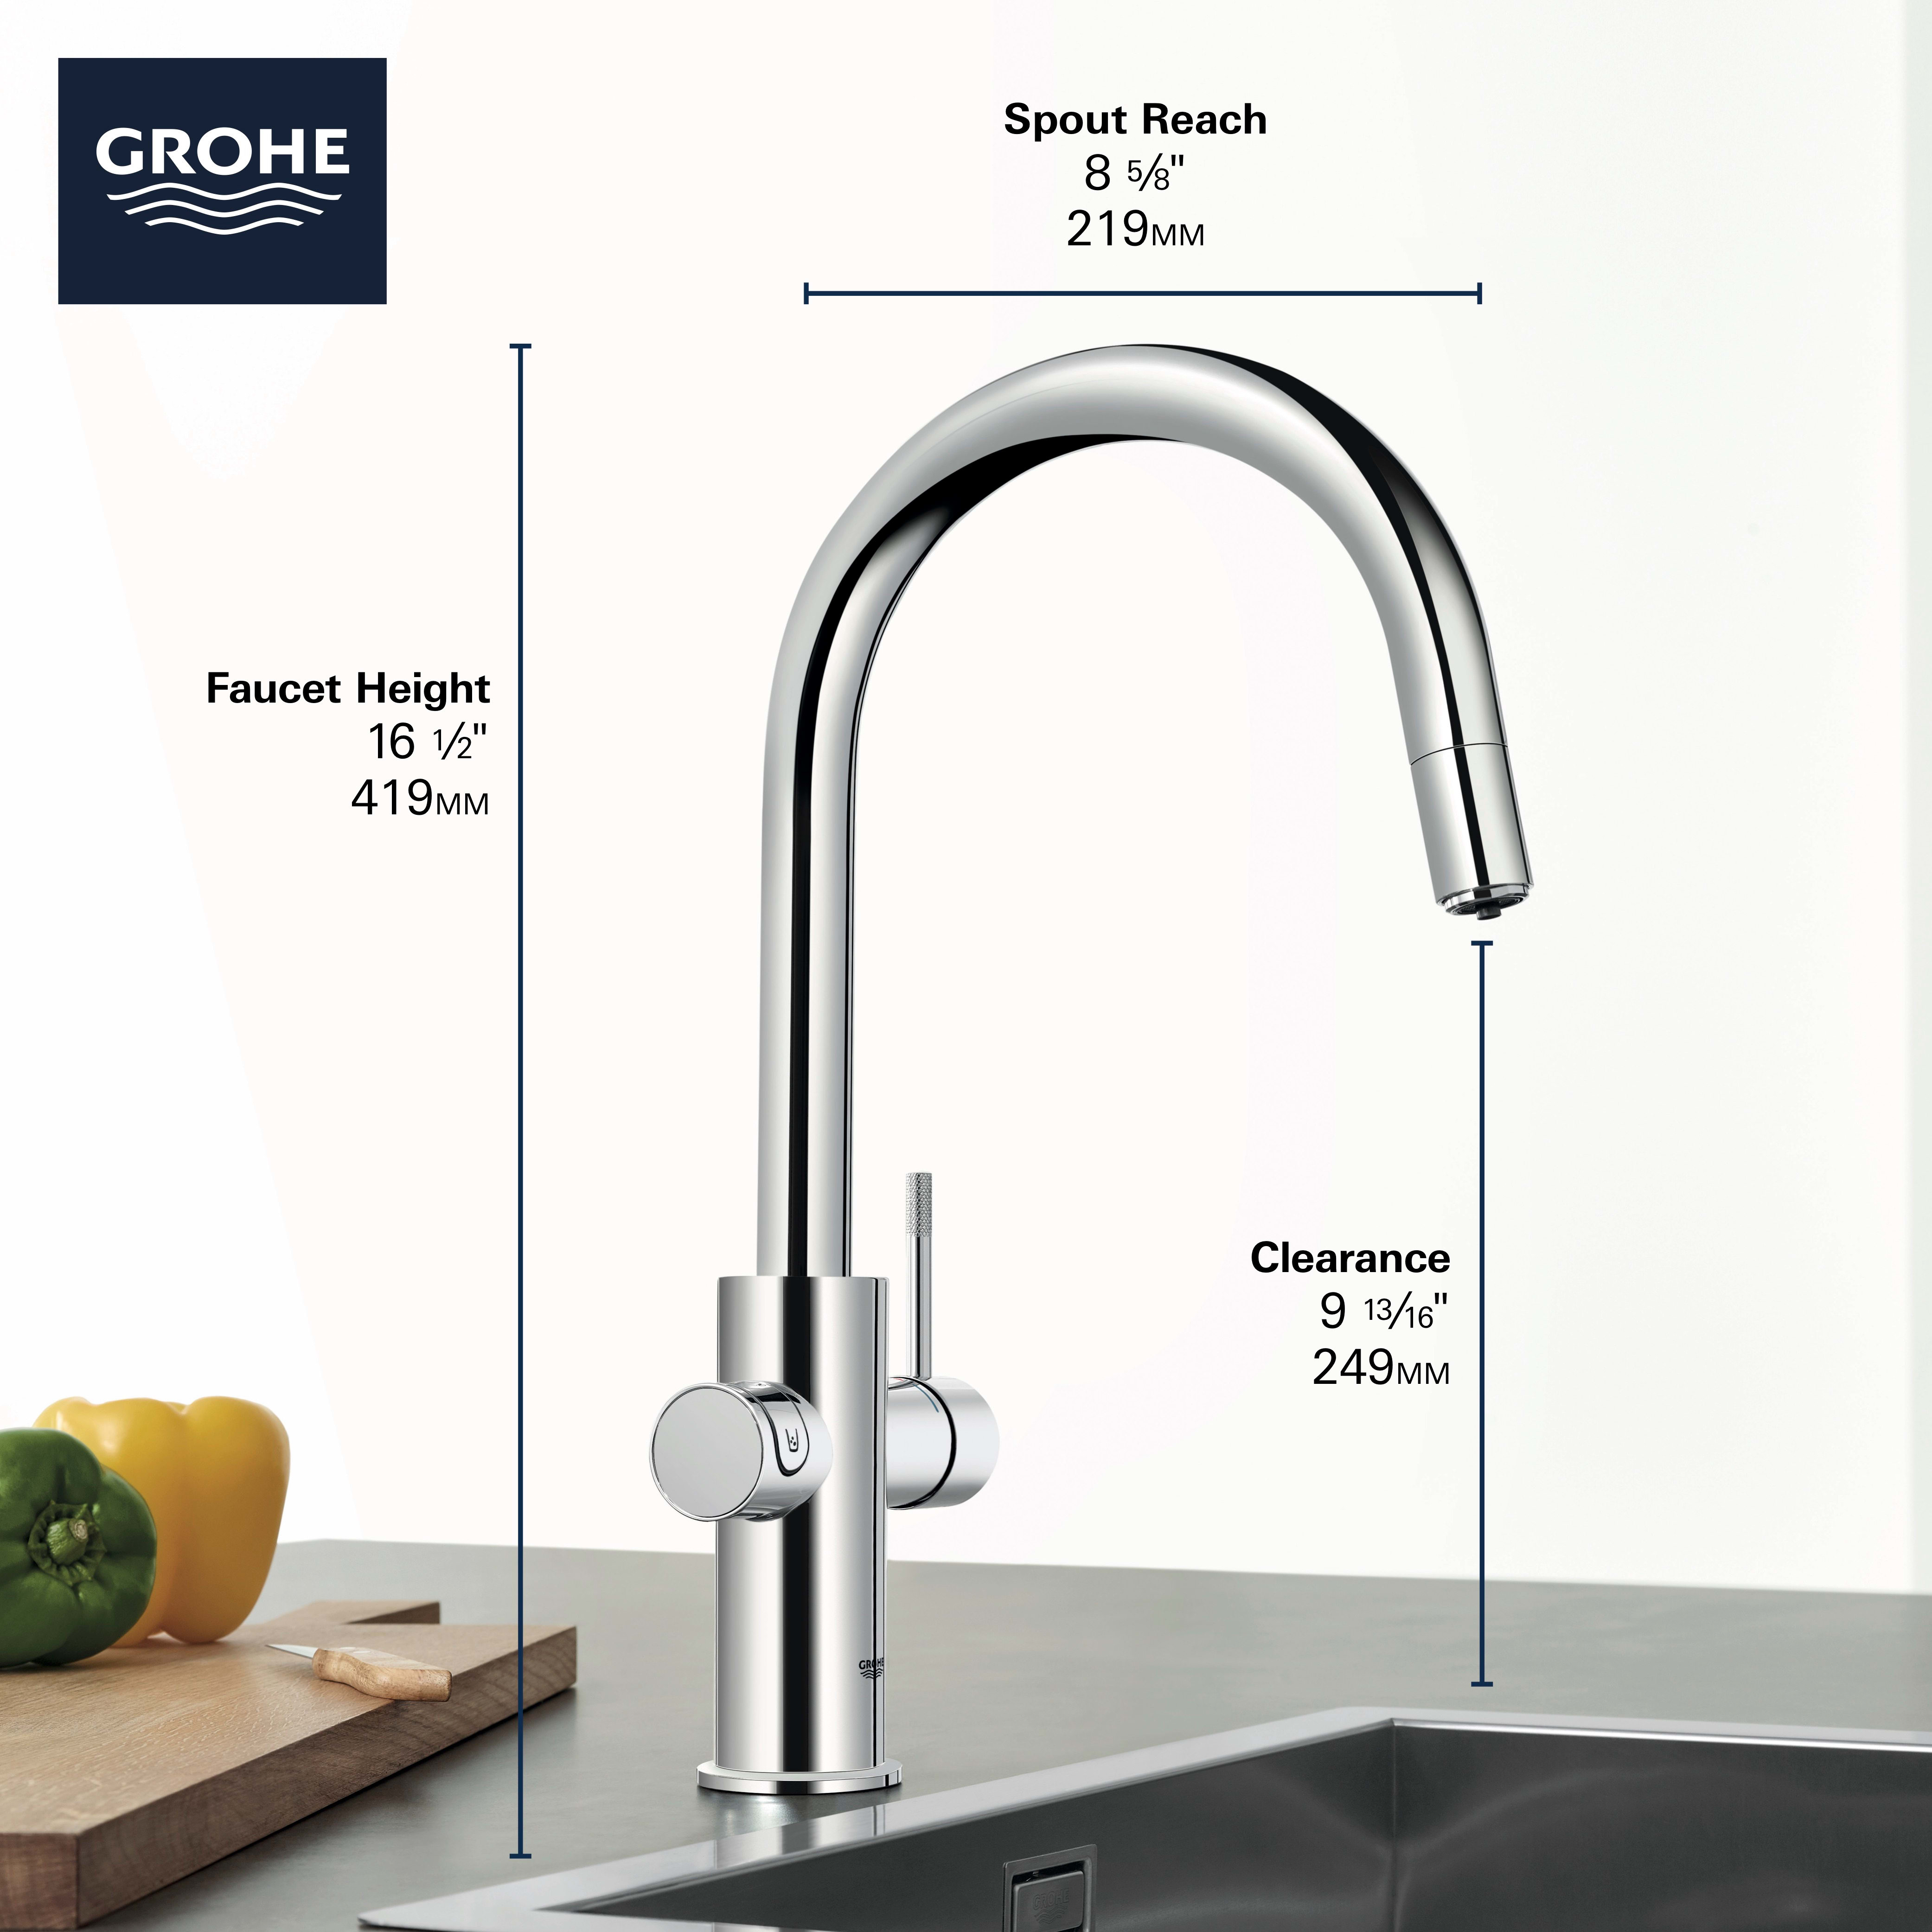 Grohe Blue water system gives you sparkling water straight from the tap